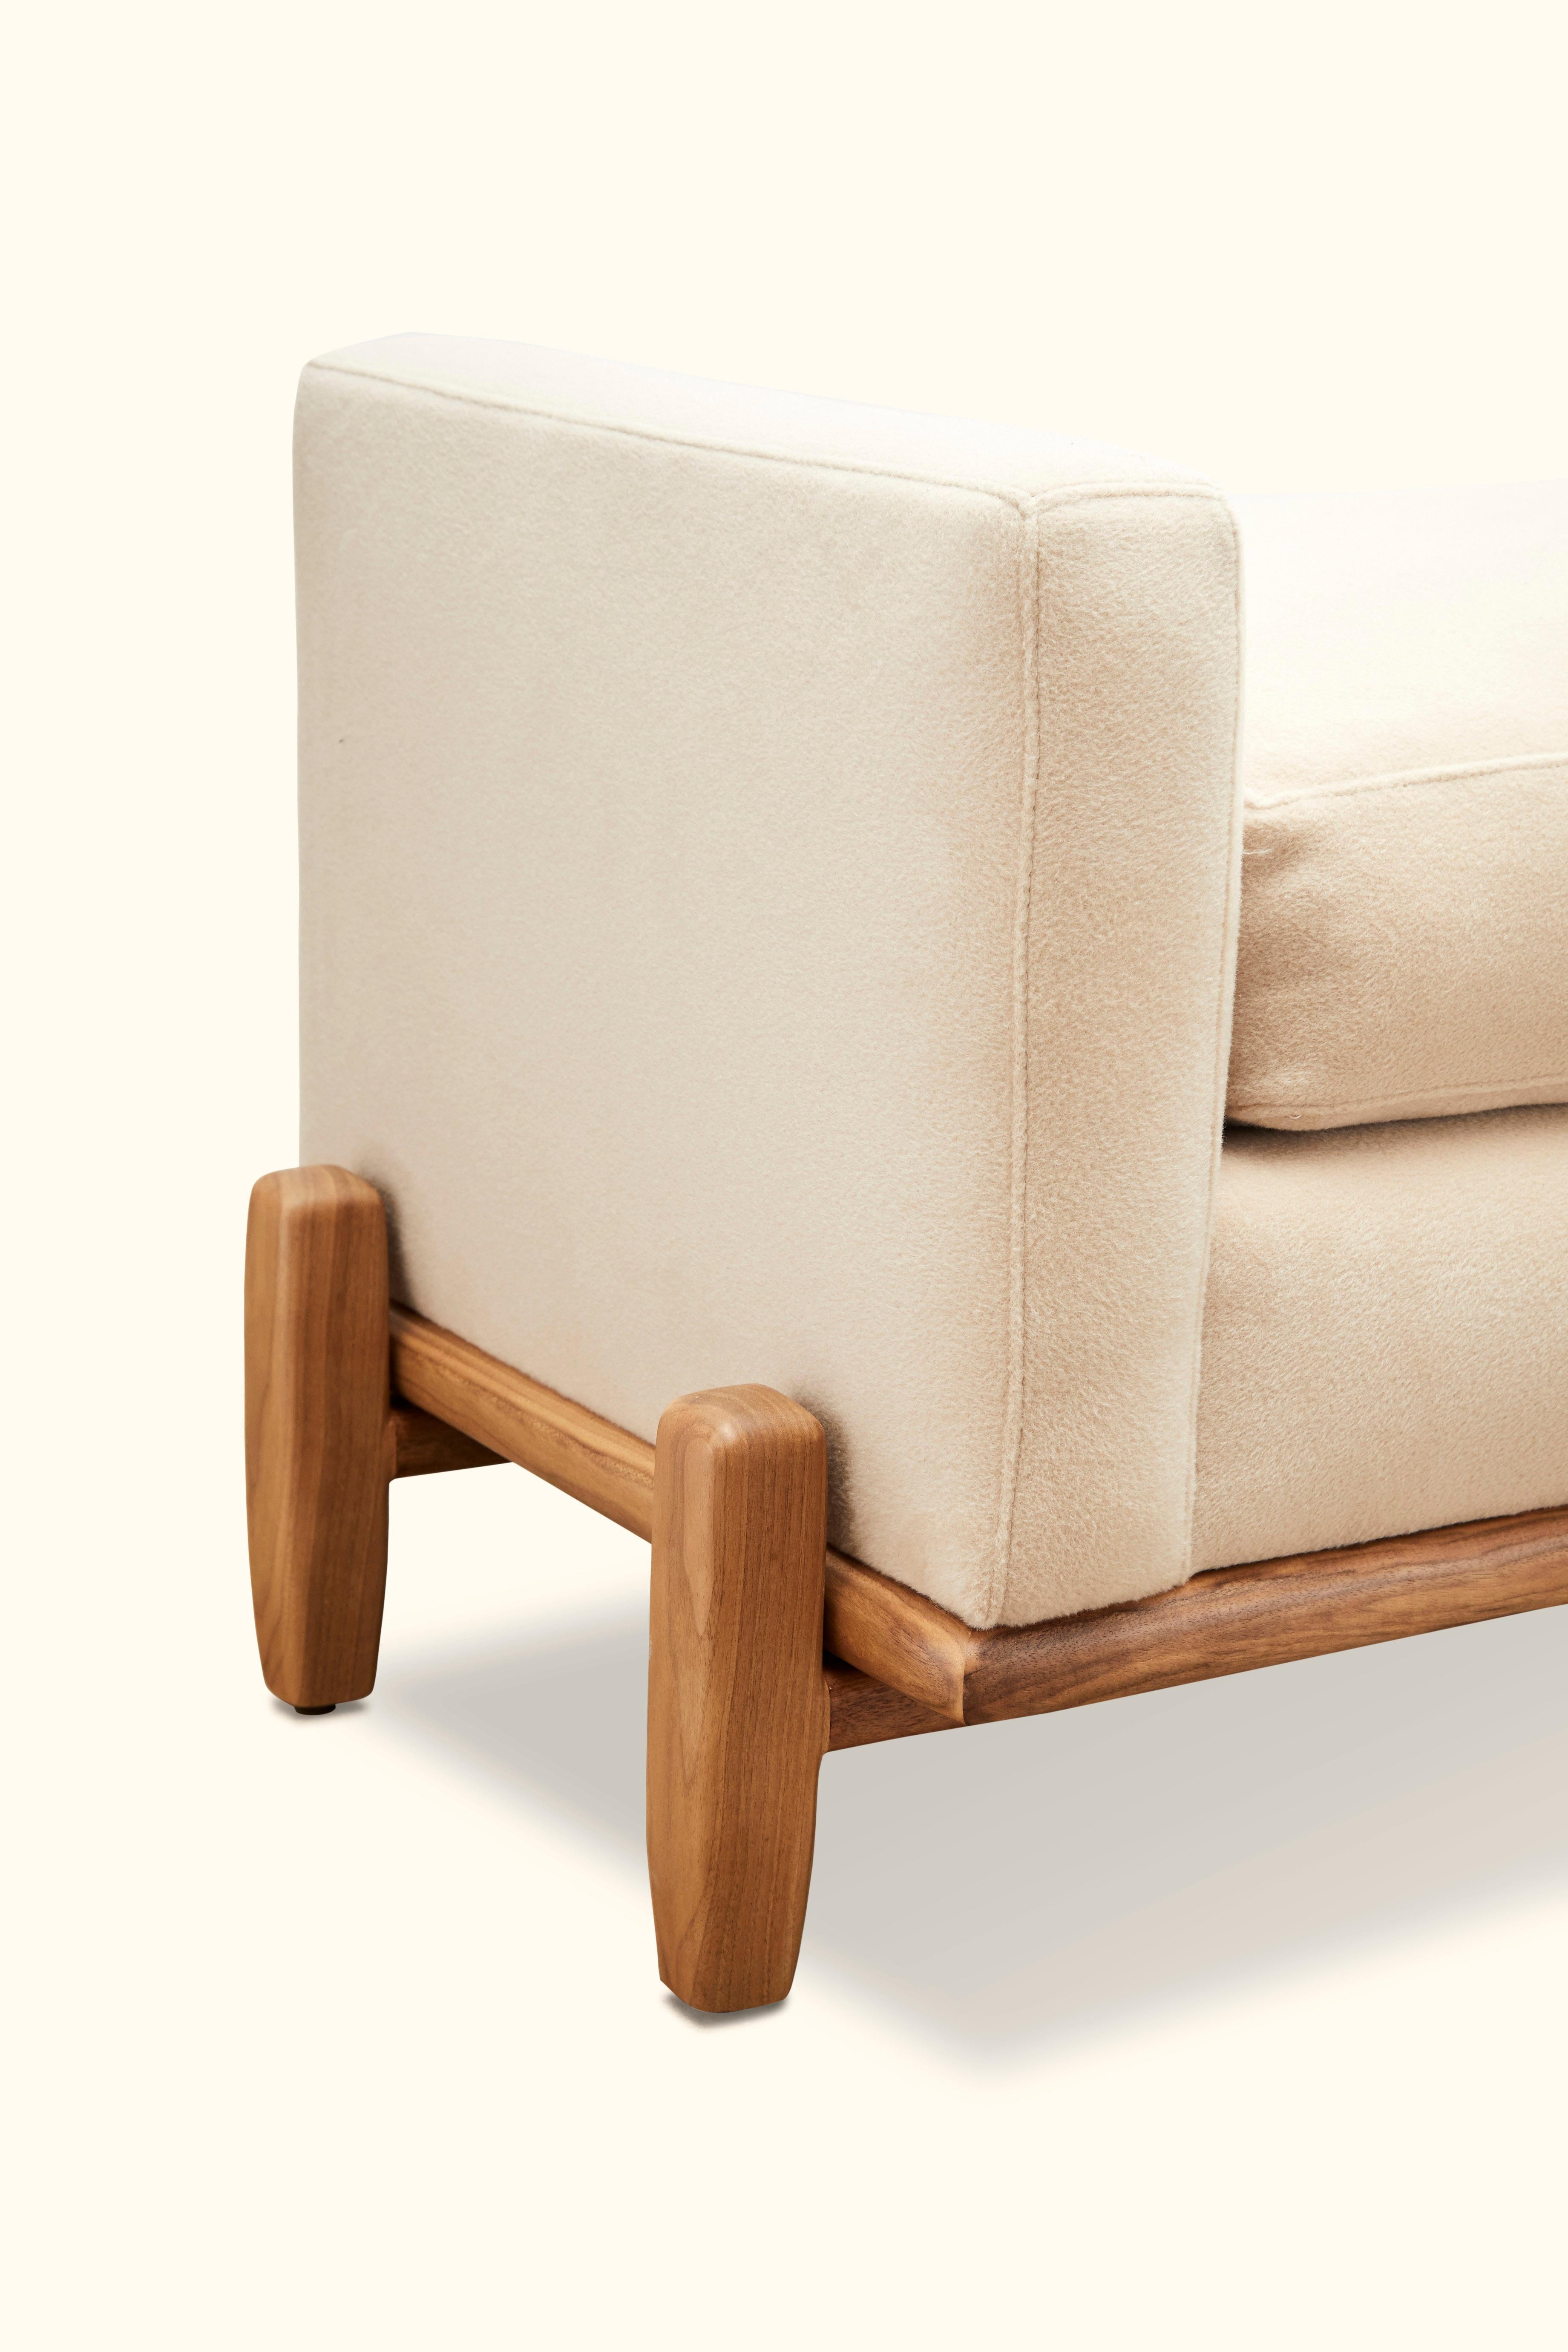 American George Bench by Brian Paquette for Lawson-Fenning